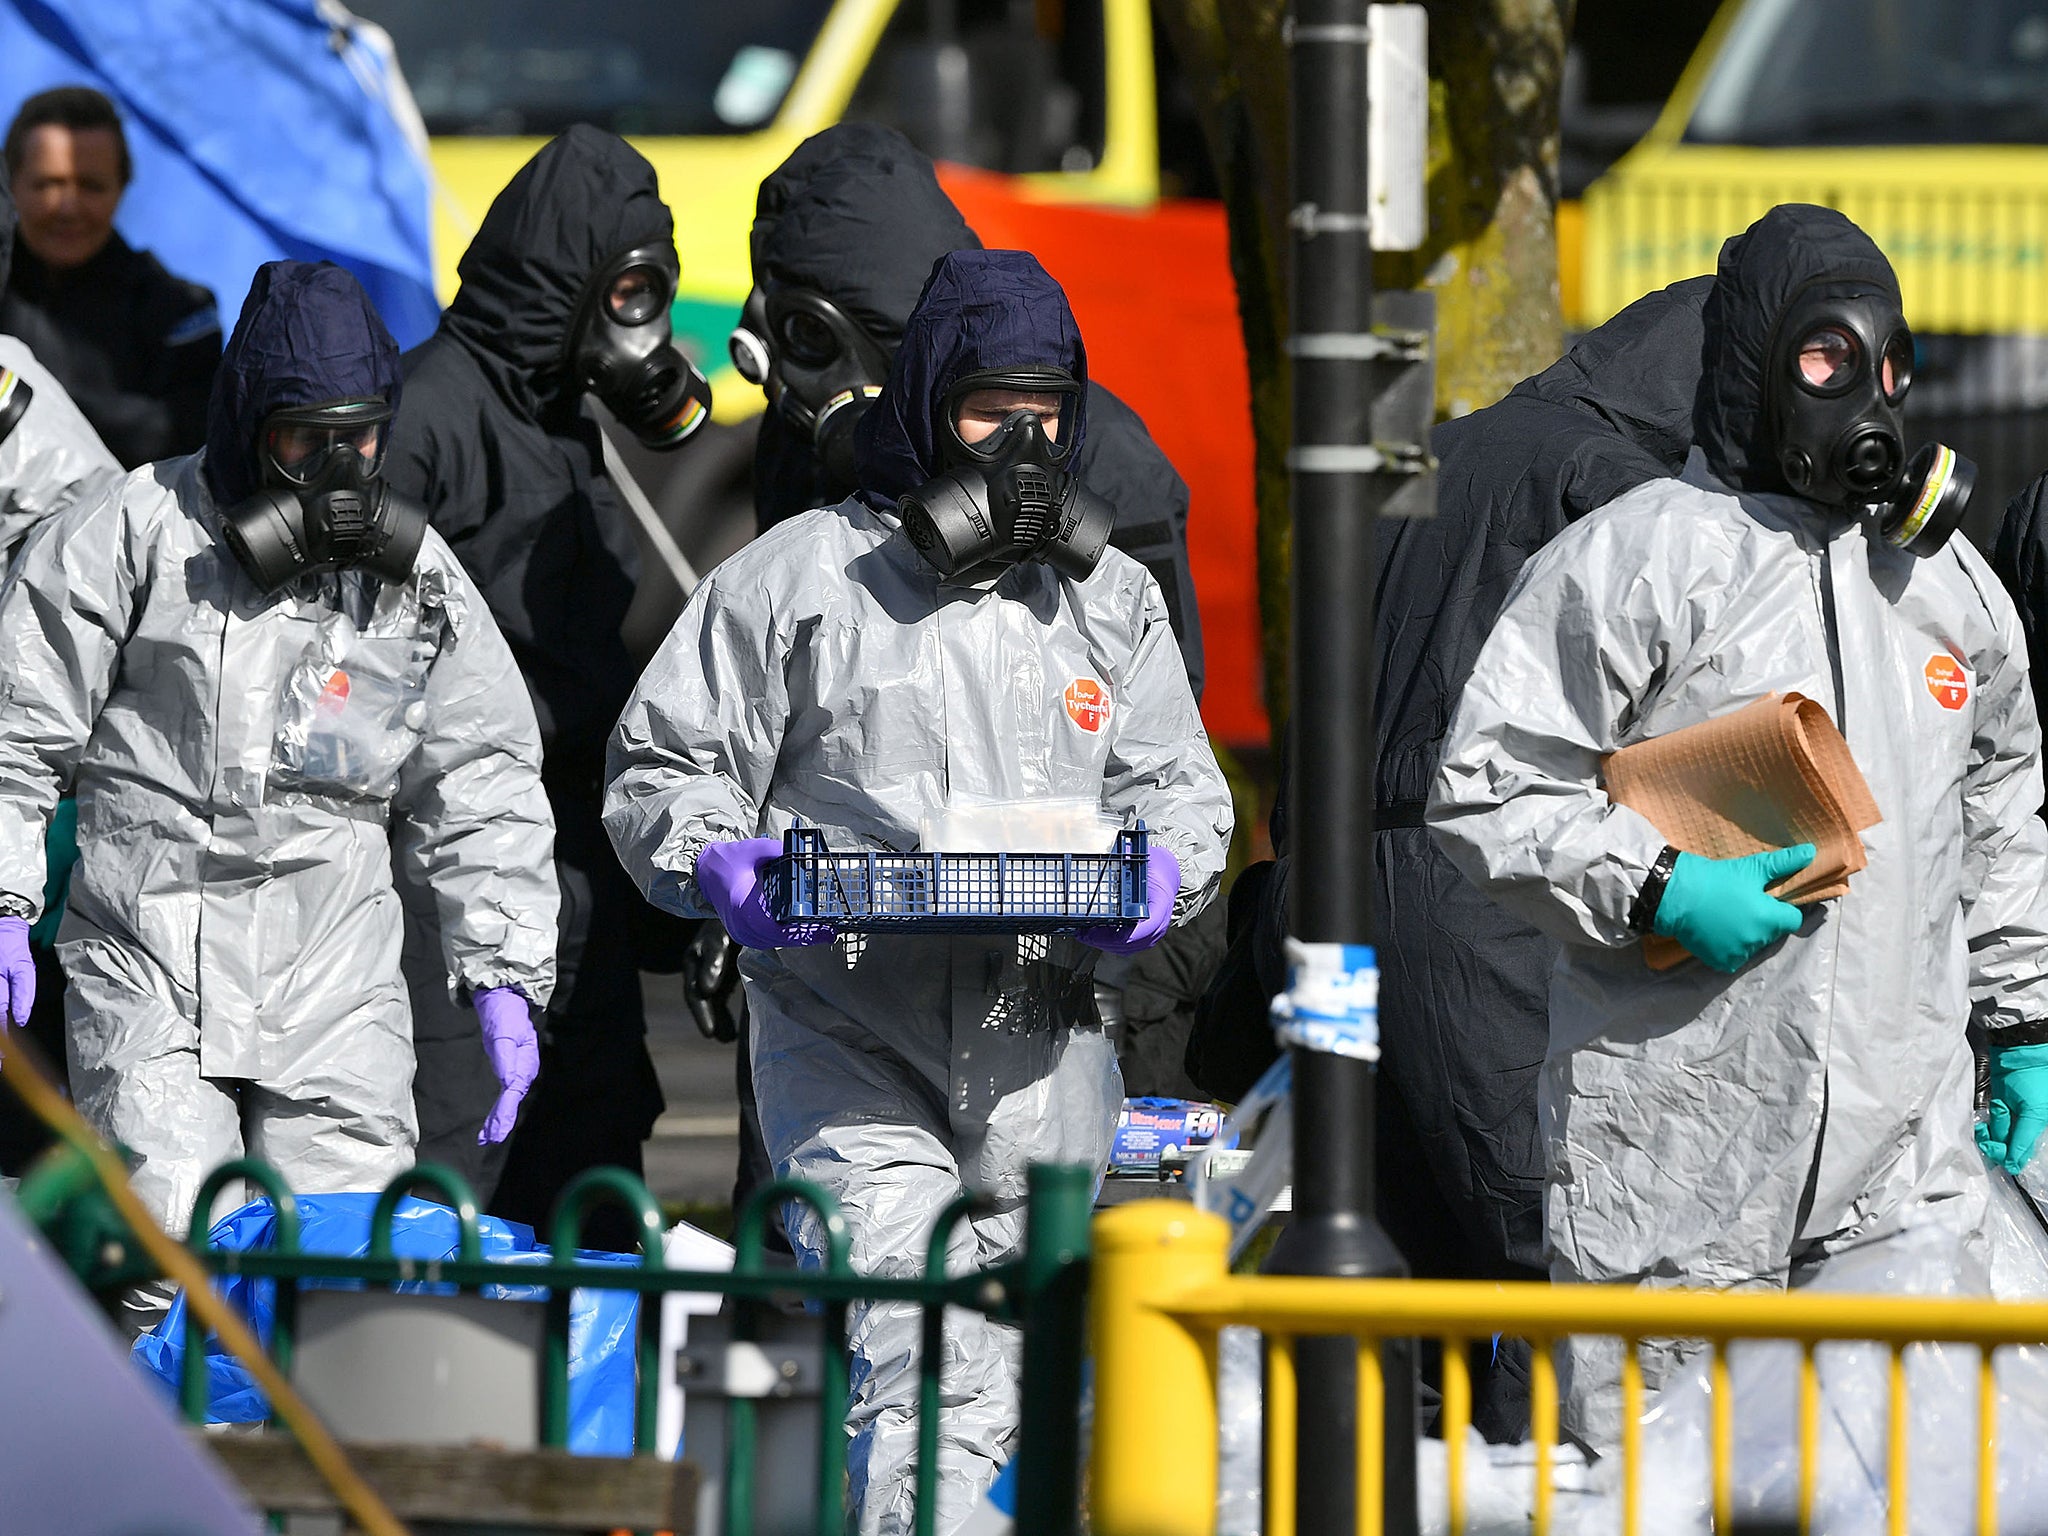 Russia calls on Britain to present 'every possible element of evidence' on Salisbury nerve agent attack